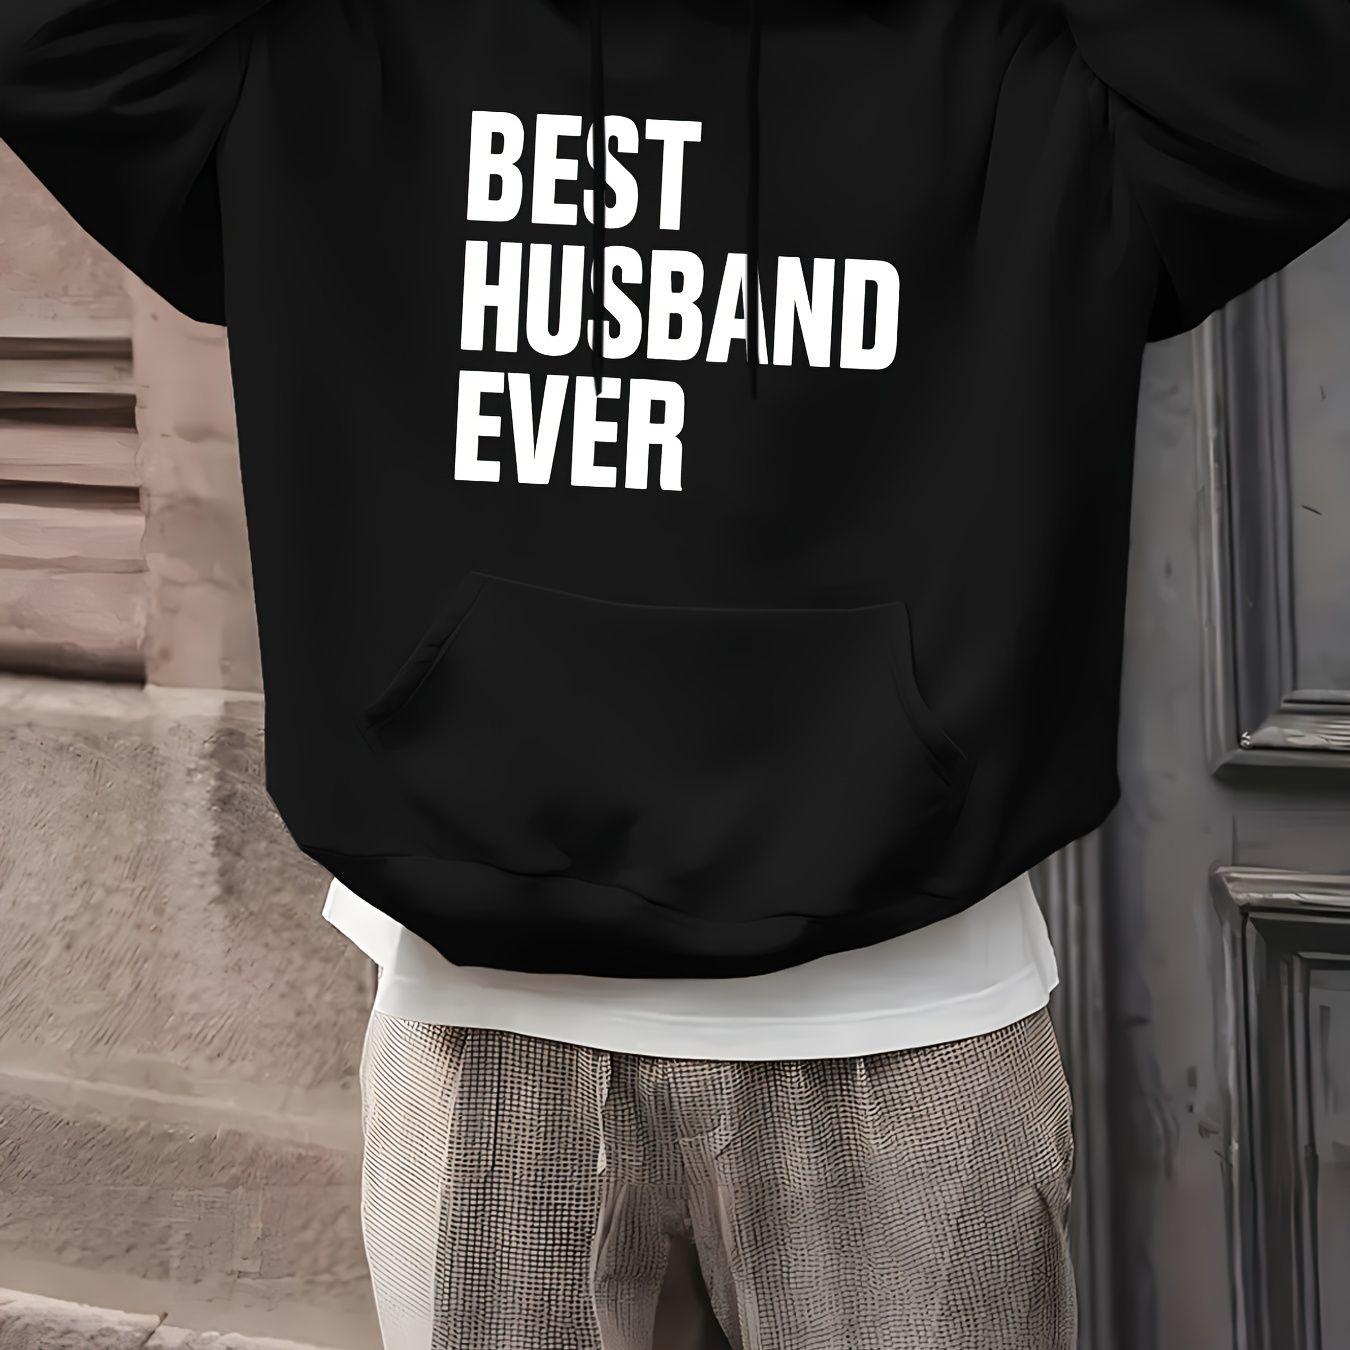 

Best Husband Ever Print Sweatshirt, Men's Fleece Long Sleeve Hoodies Street Casual Sports And Fashionable With Kangaroo Pocket, For Outdoor Sports, For Autumn Winter, Warm And Cozy